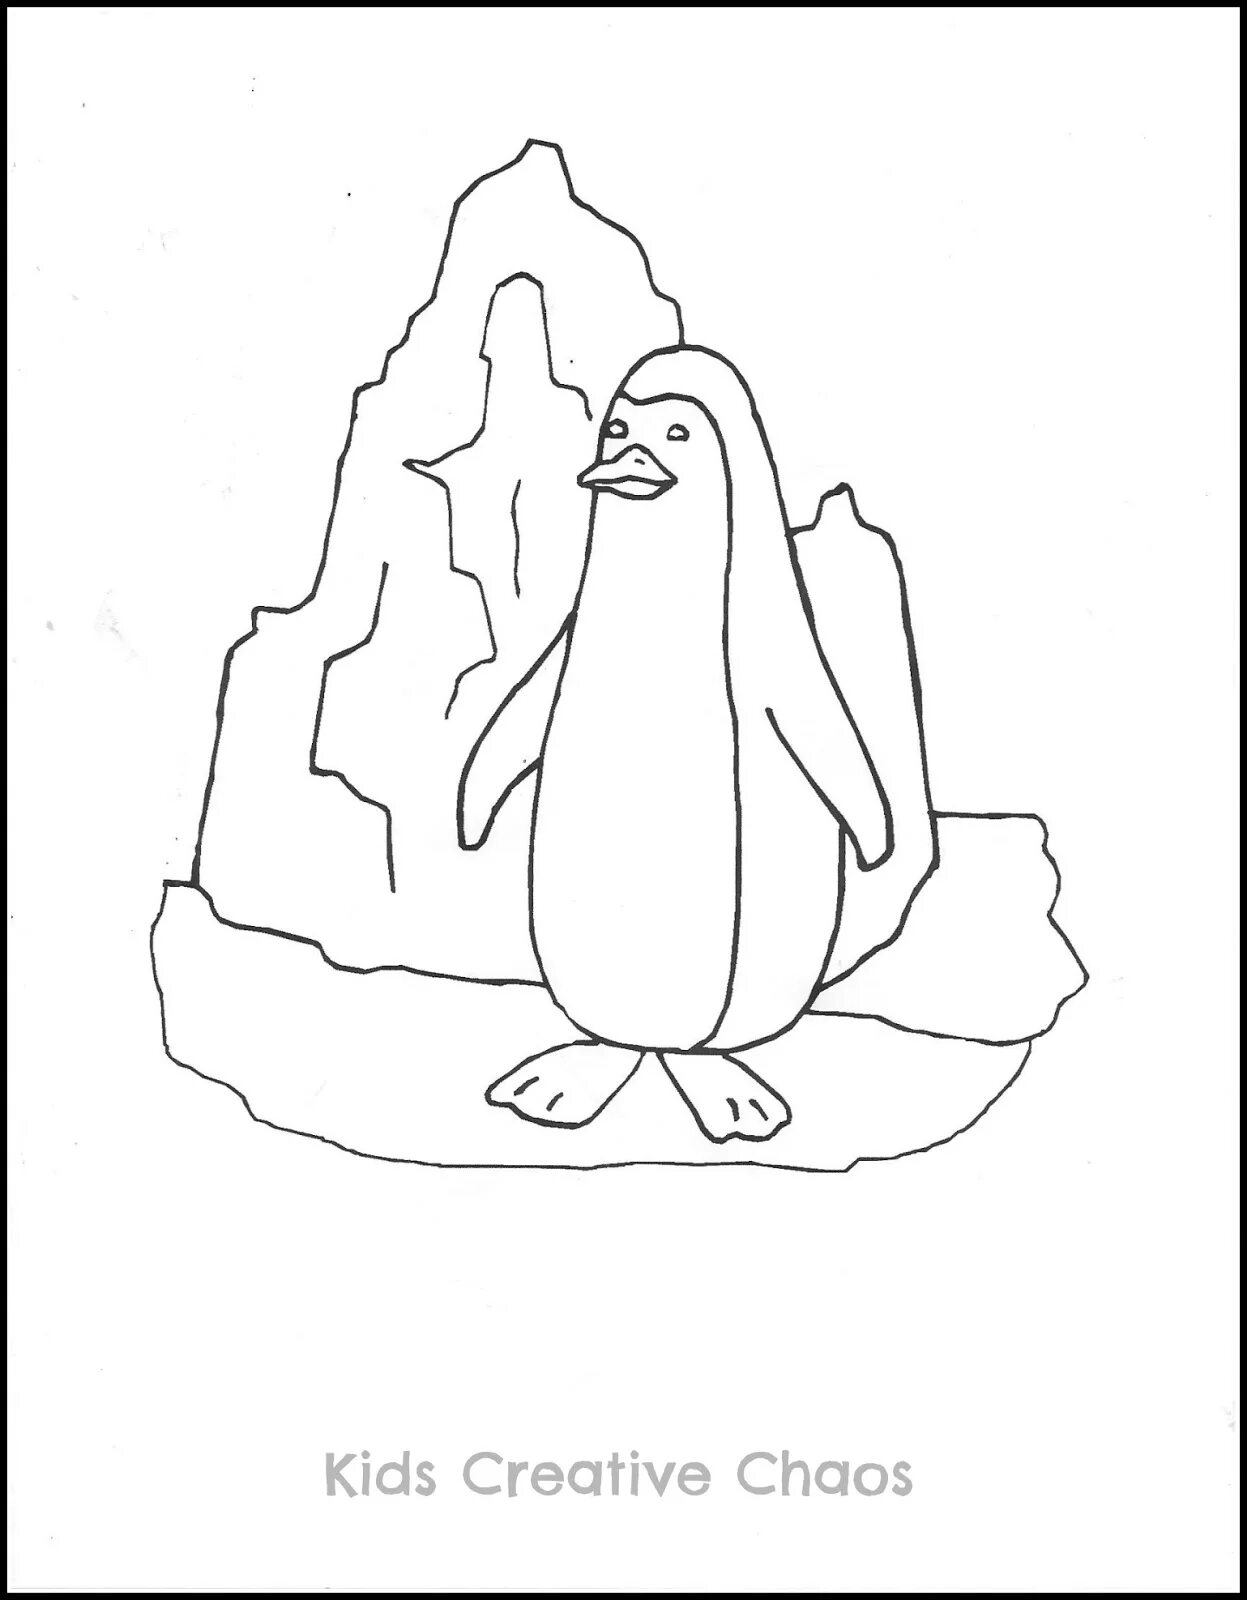 Awesome penguin on an ice floe coloring pages for kids